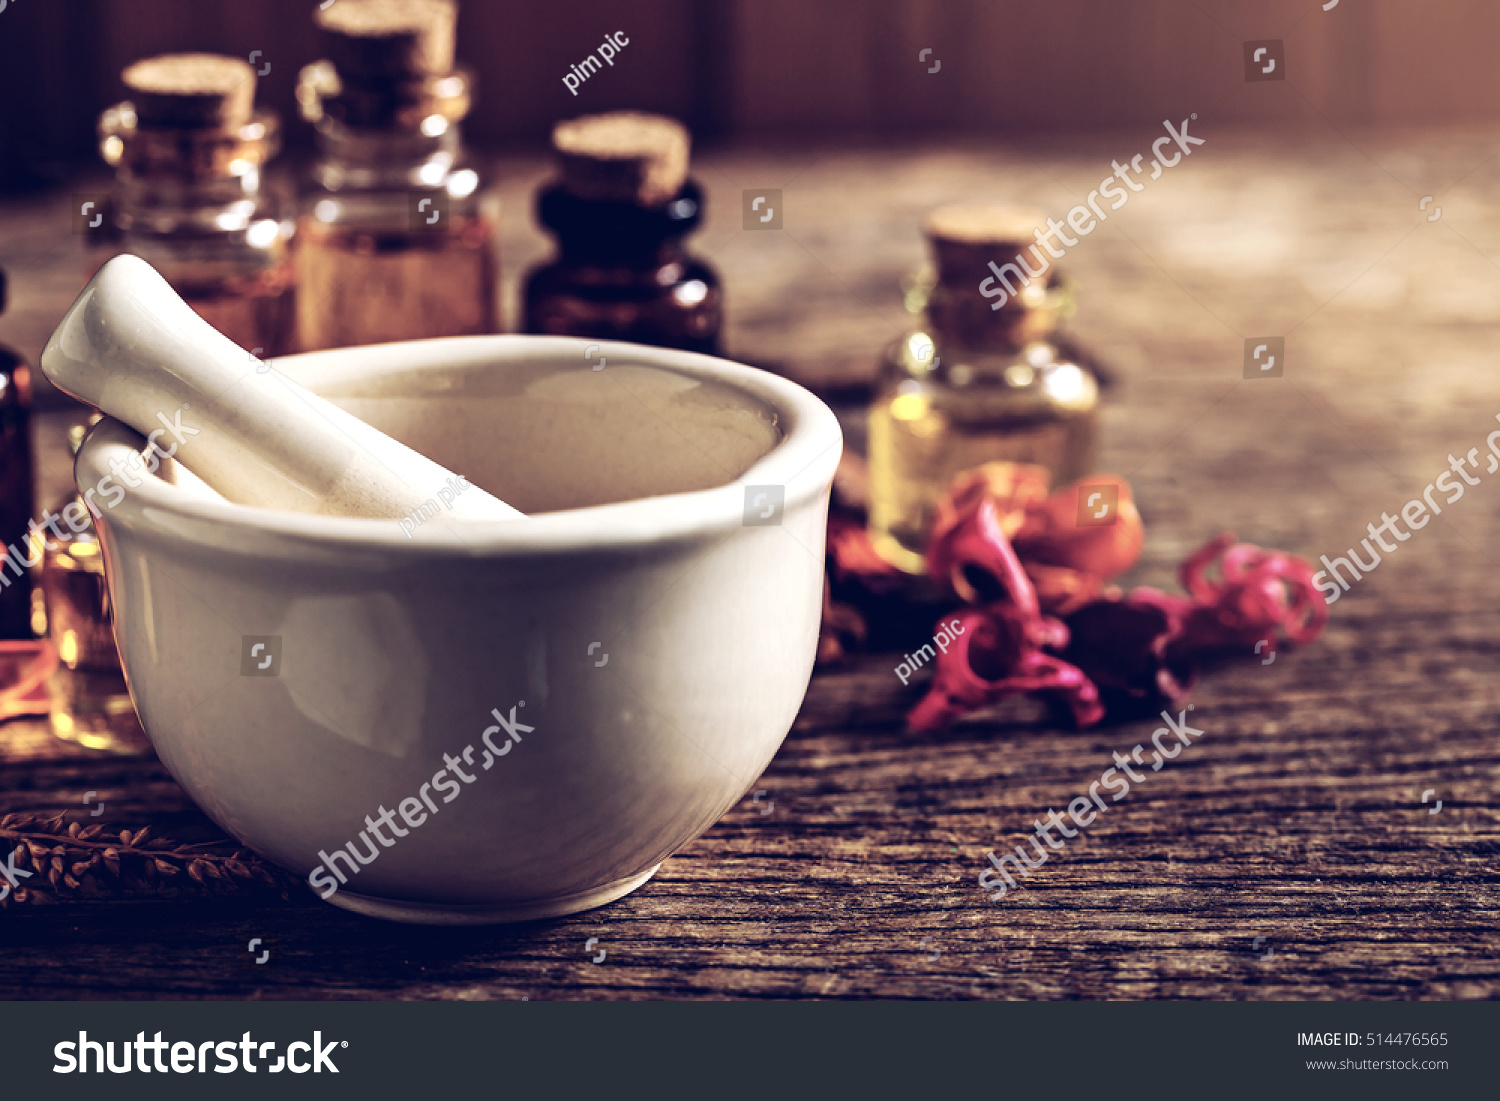 mortar and bottle of aroma essential oil with dry flower on wooden table, spa concept.vintage color tone. #514476565